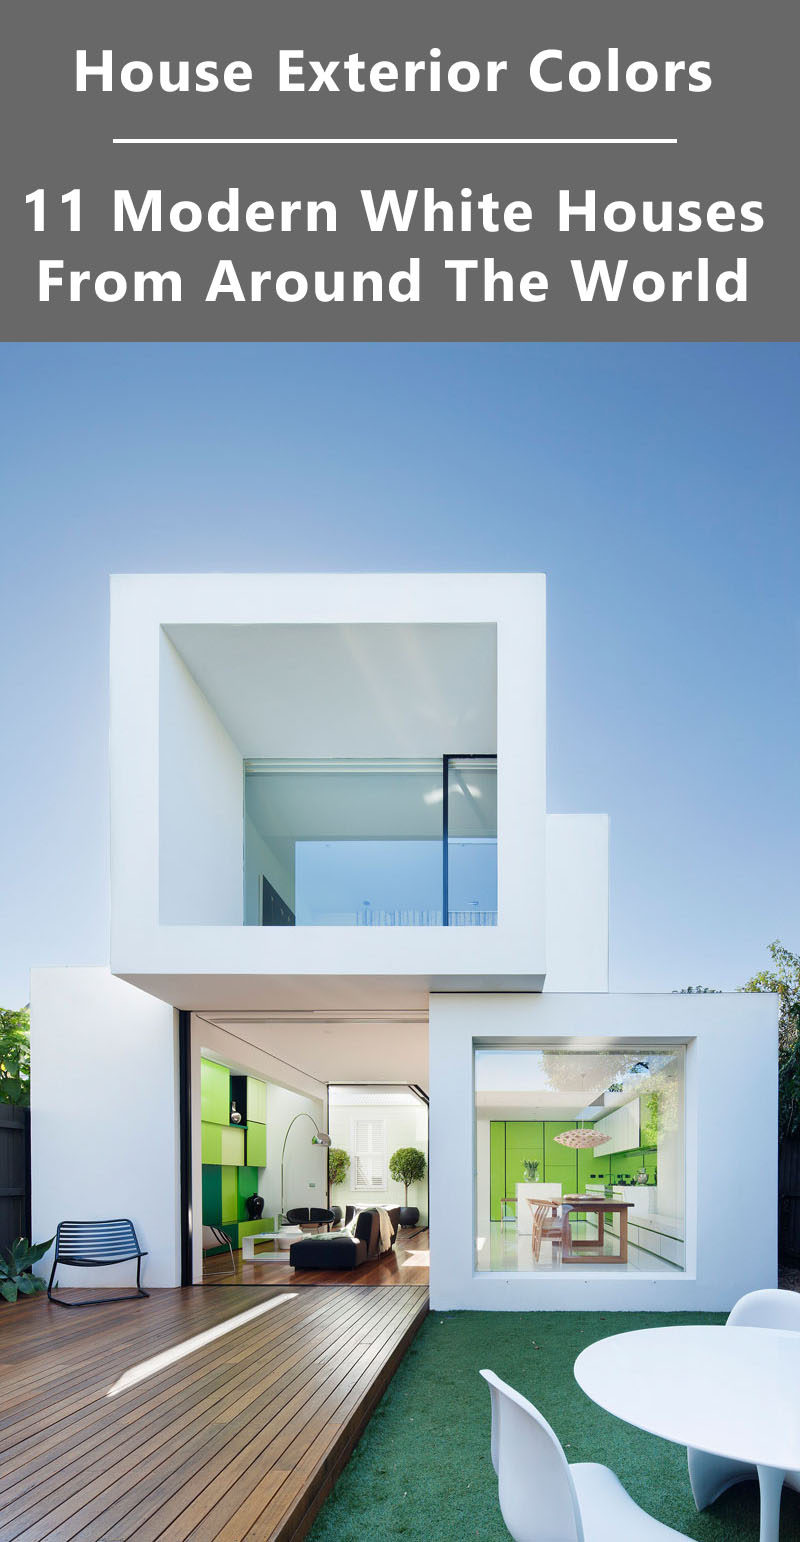 House Exterior Colors - 11 Modern White Houses From Around The World